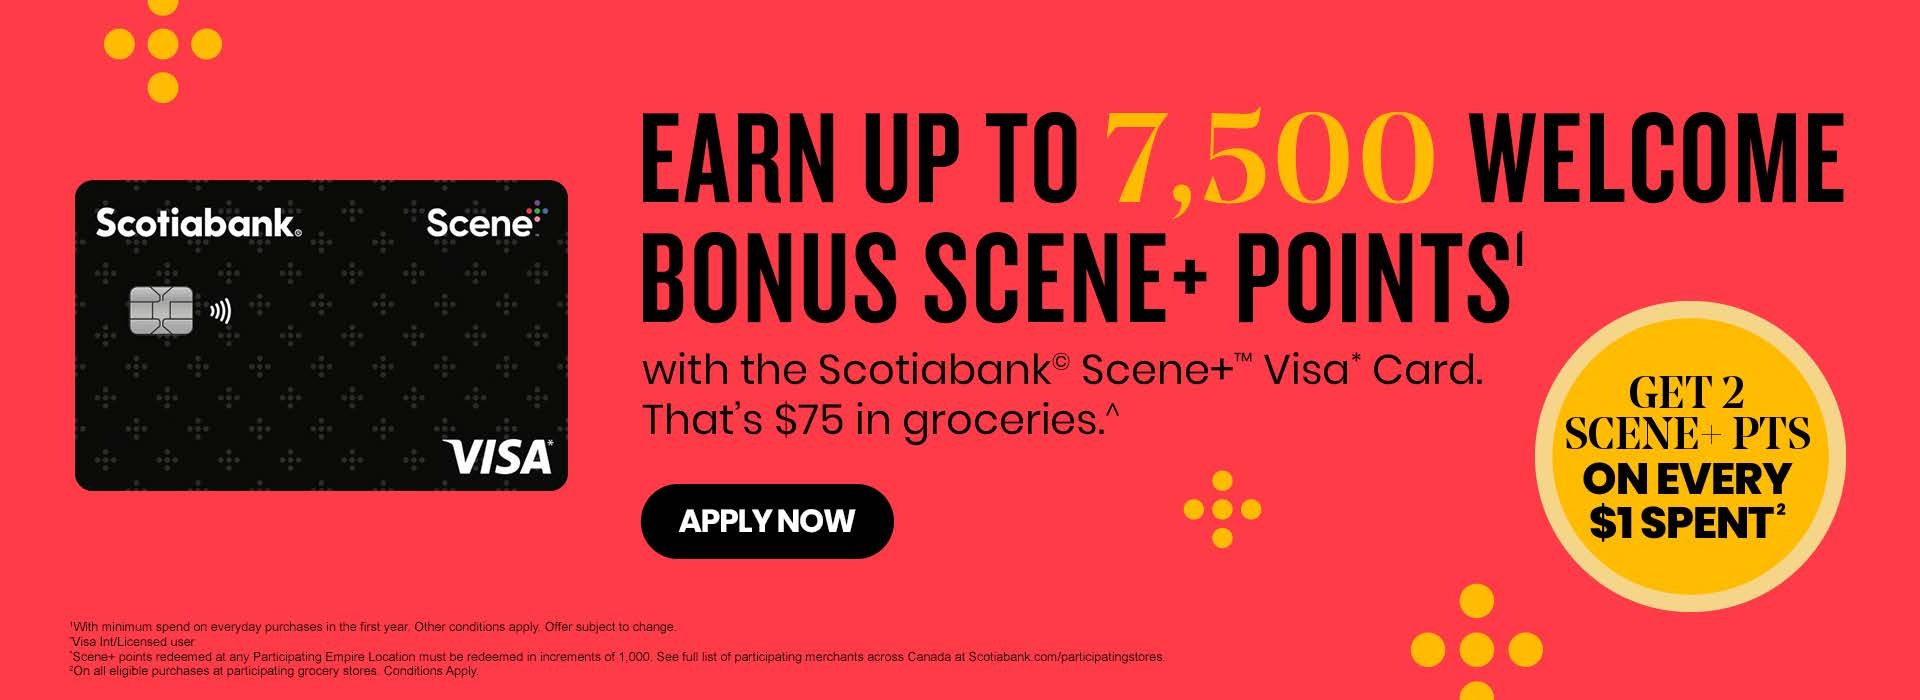 The following image consists of the text, "Earn up to 7,500 welcome bonus scene+ points with the Scotiabank Scene+ Visa Card. That's $75 in grocries. Get 2 Scene+ PTS on every $1 spent."